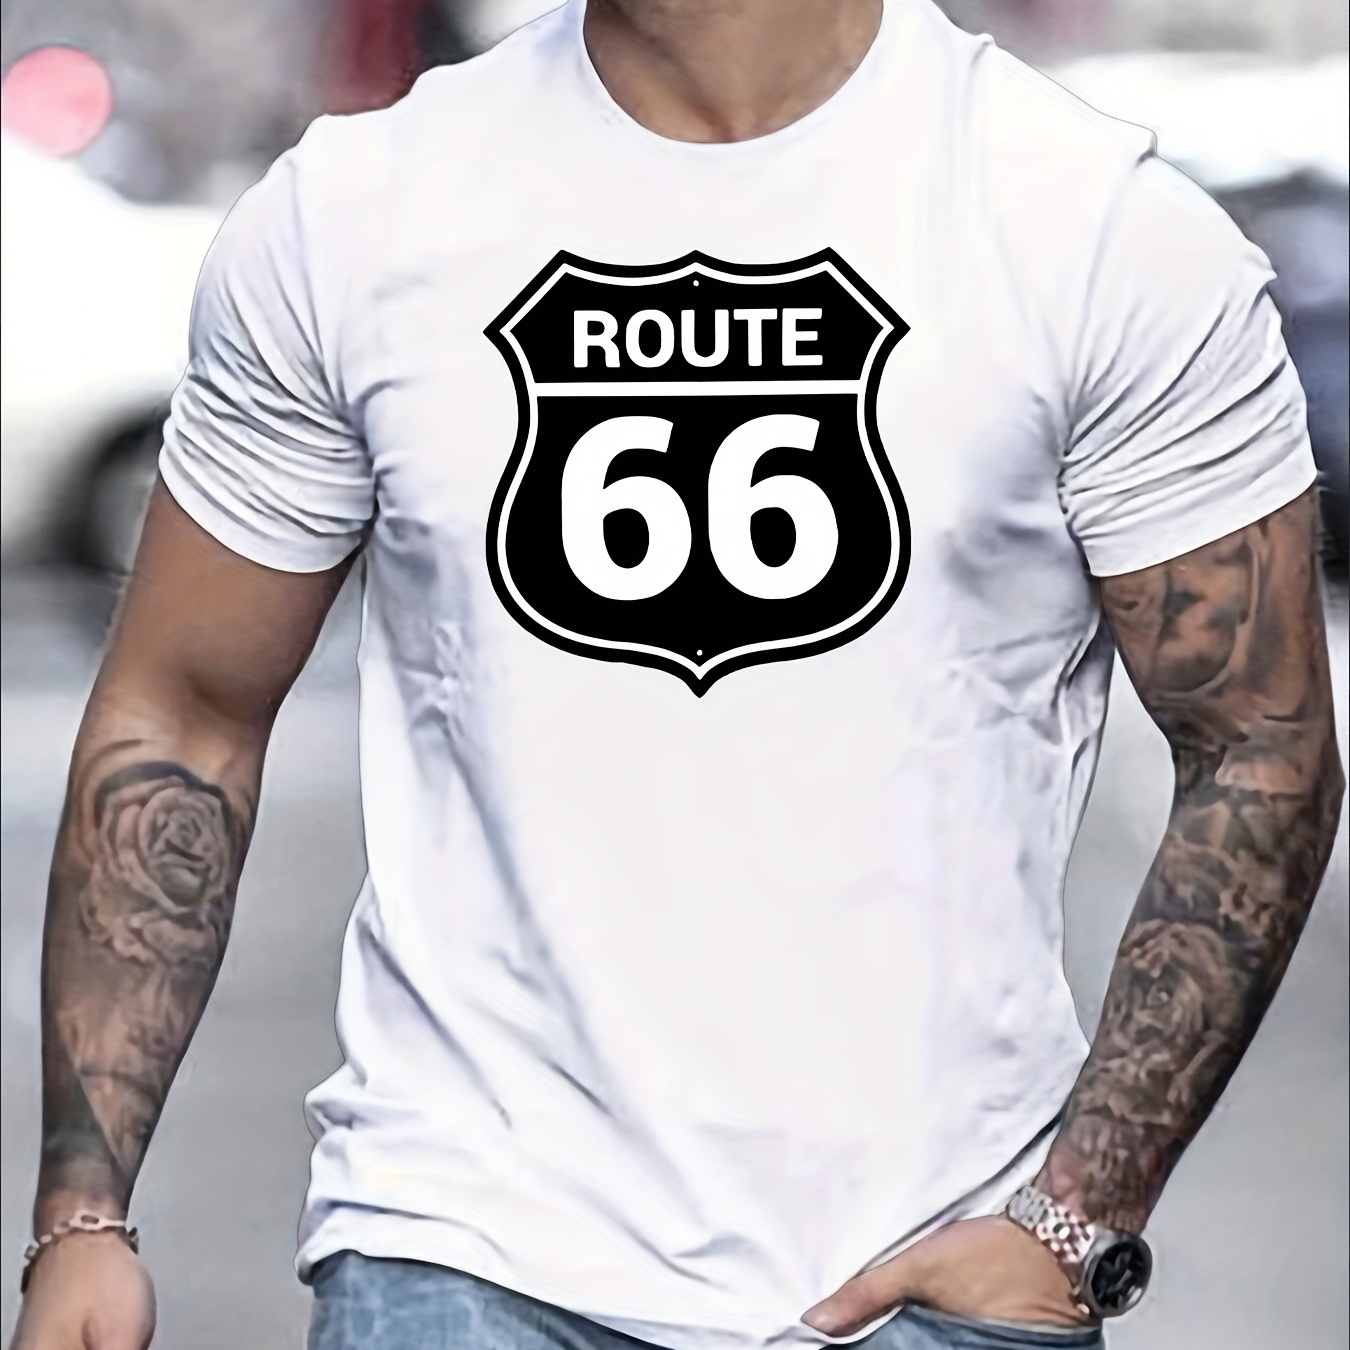 

Route 66 Print T-shirt, Tees For Men, 100% Cotton Comfortable Casual Short Sleeve T-shirt For Summer